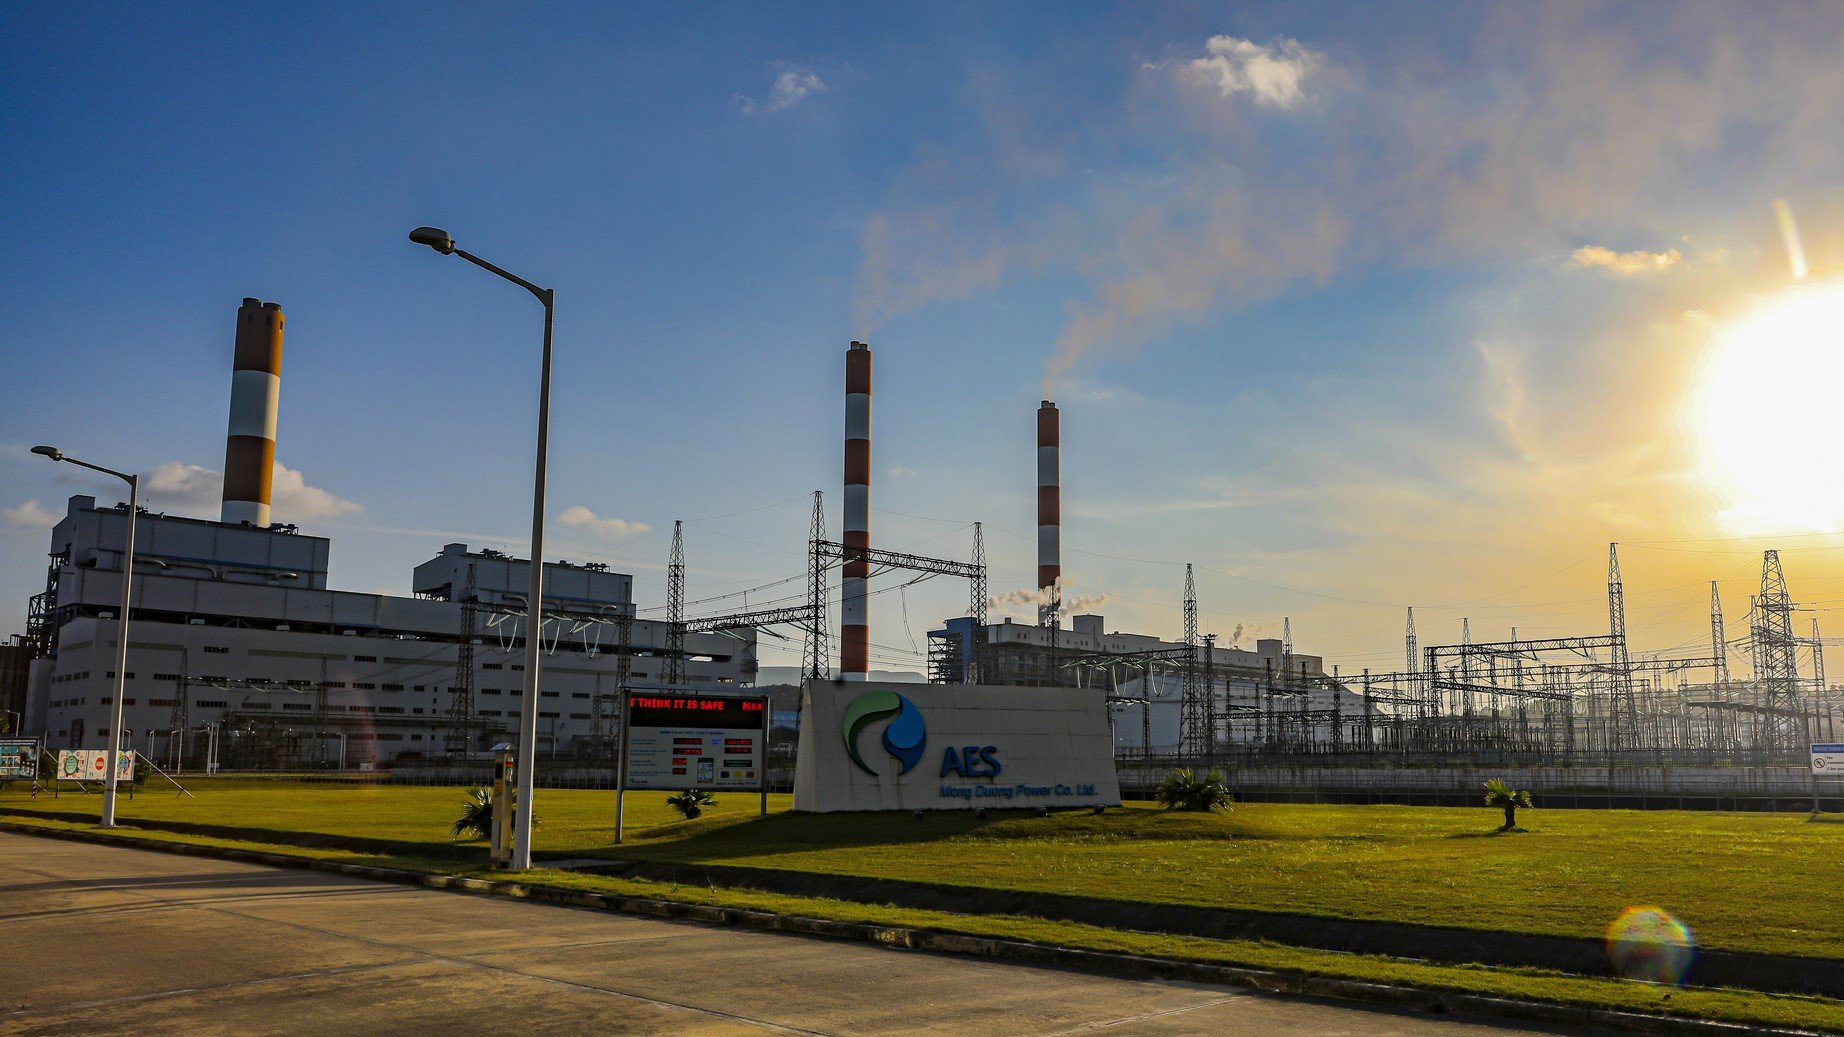 Mong Duong 2 power plant in Quang Ninh province, northern Vietnam. Photo courtesy of Quang Ninh newspaper.